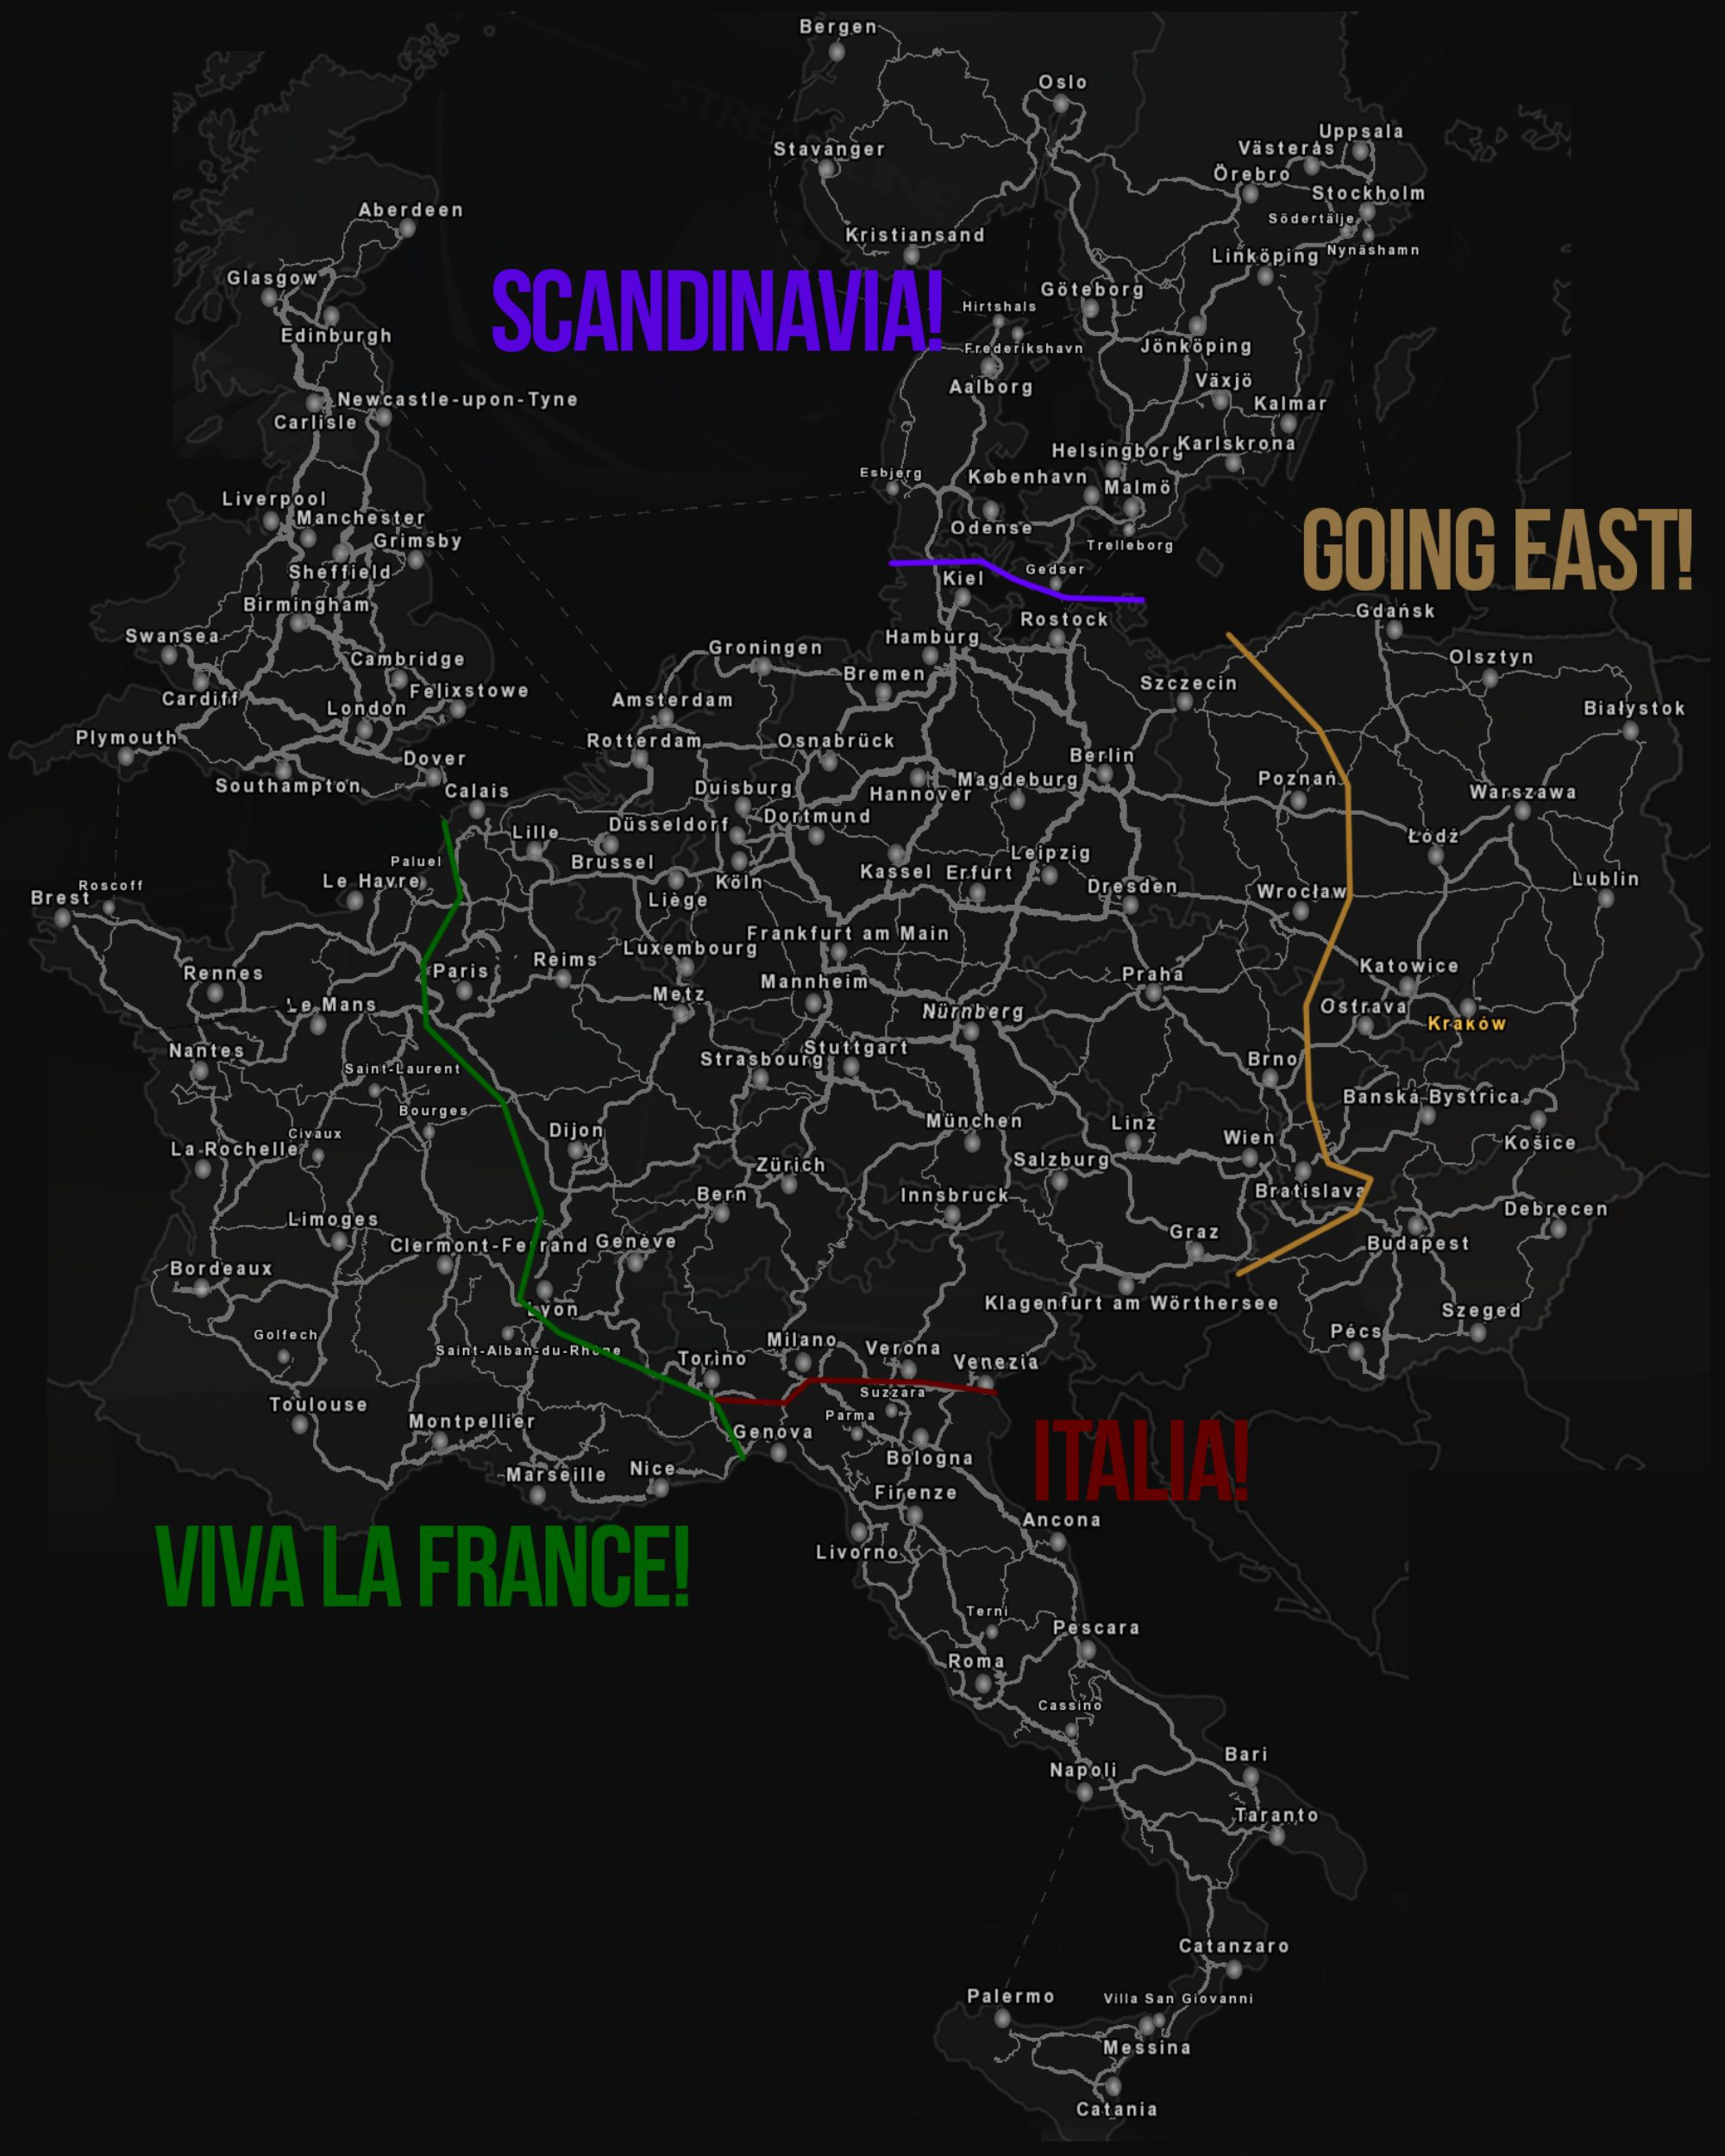 Euro Truck Simulator 2 Printable Map Lovely World Of The Game